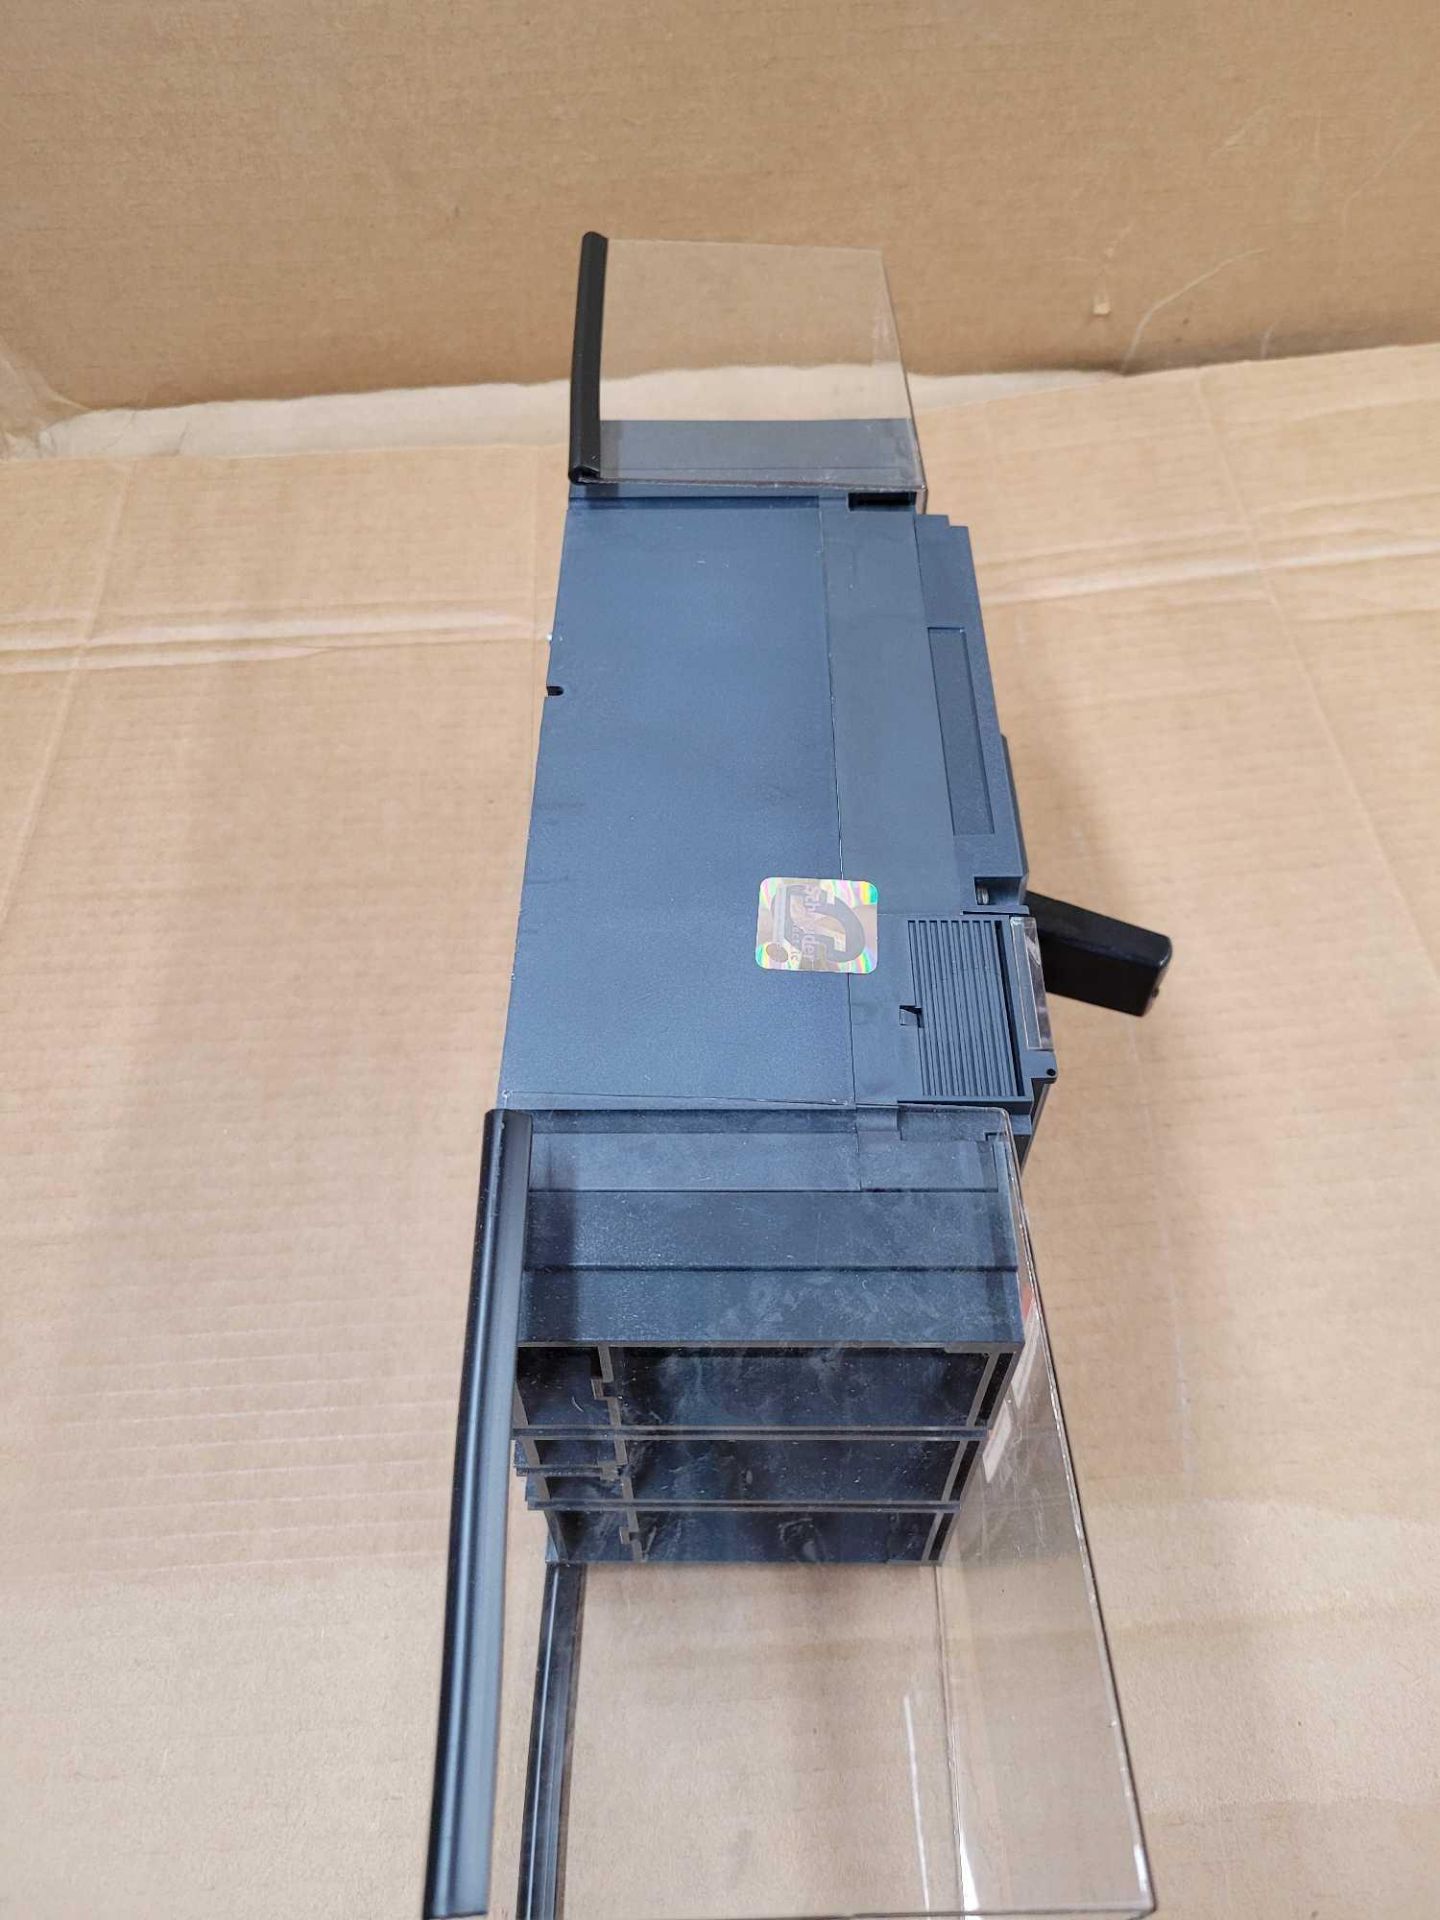 SQUARE D LJL36400U31XLY / 400 Amp Molded Case Circuit Breaker  /  Lot Weight: 13.0 lbs - Image 4 of 7